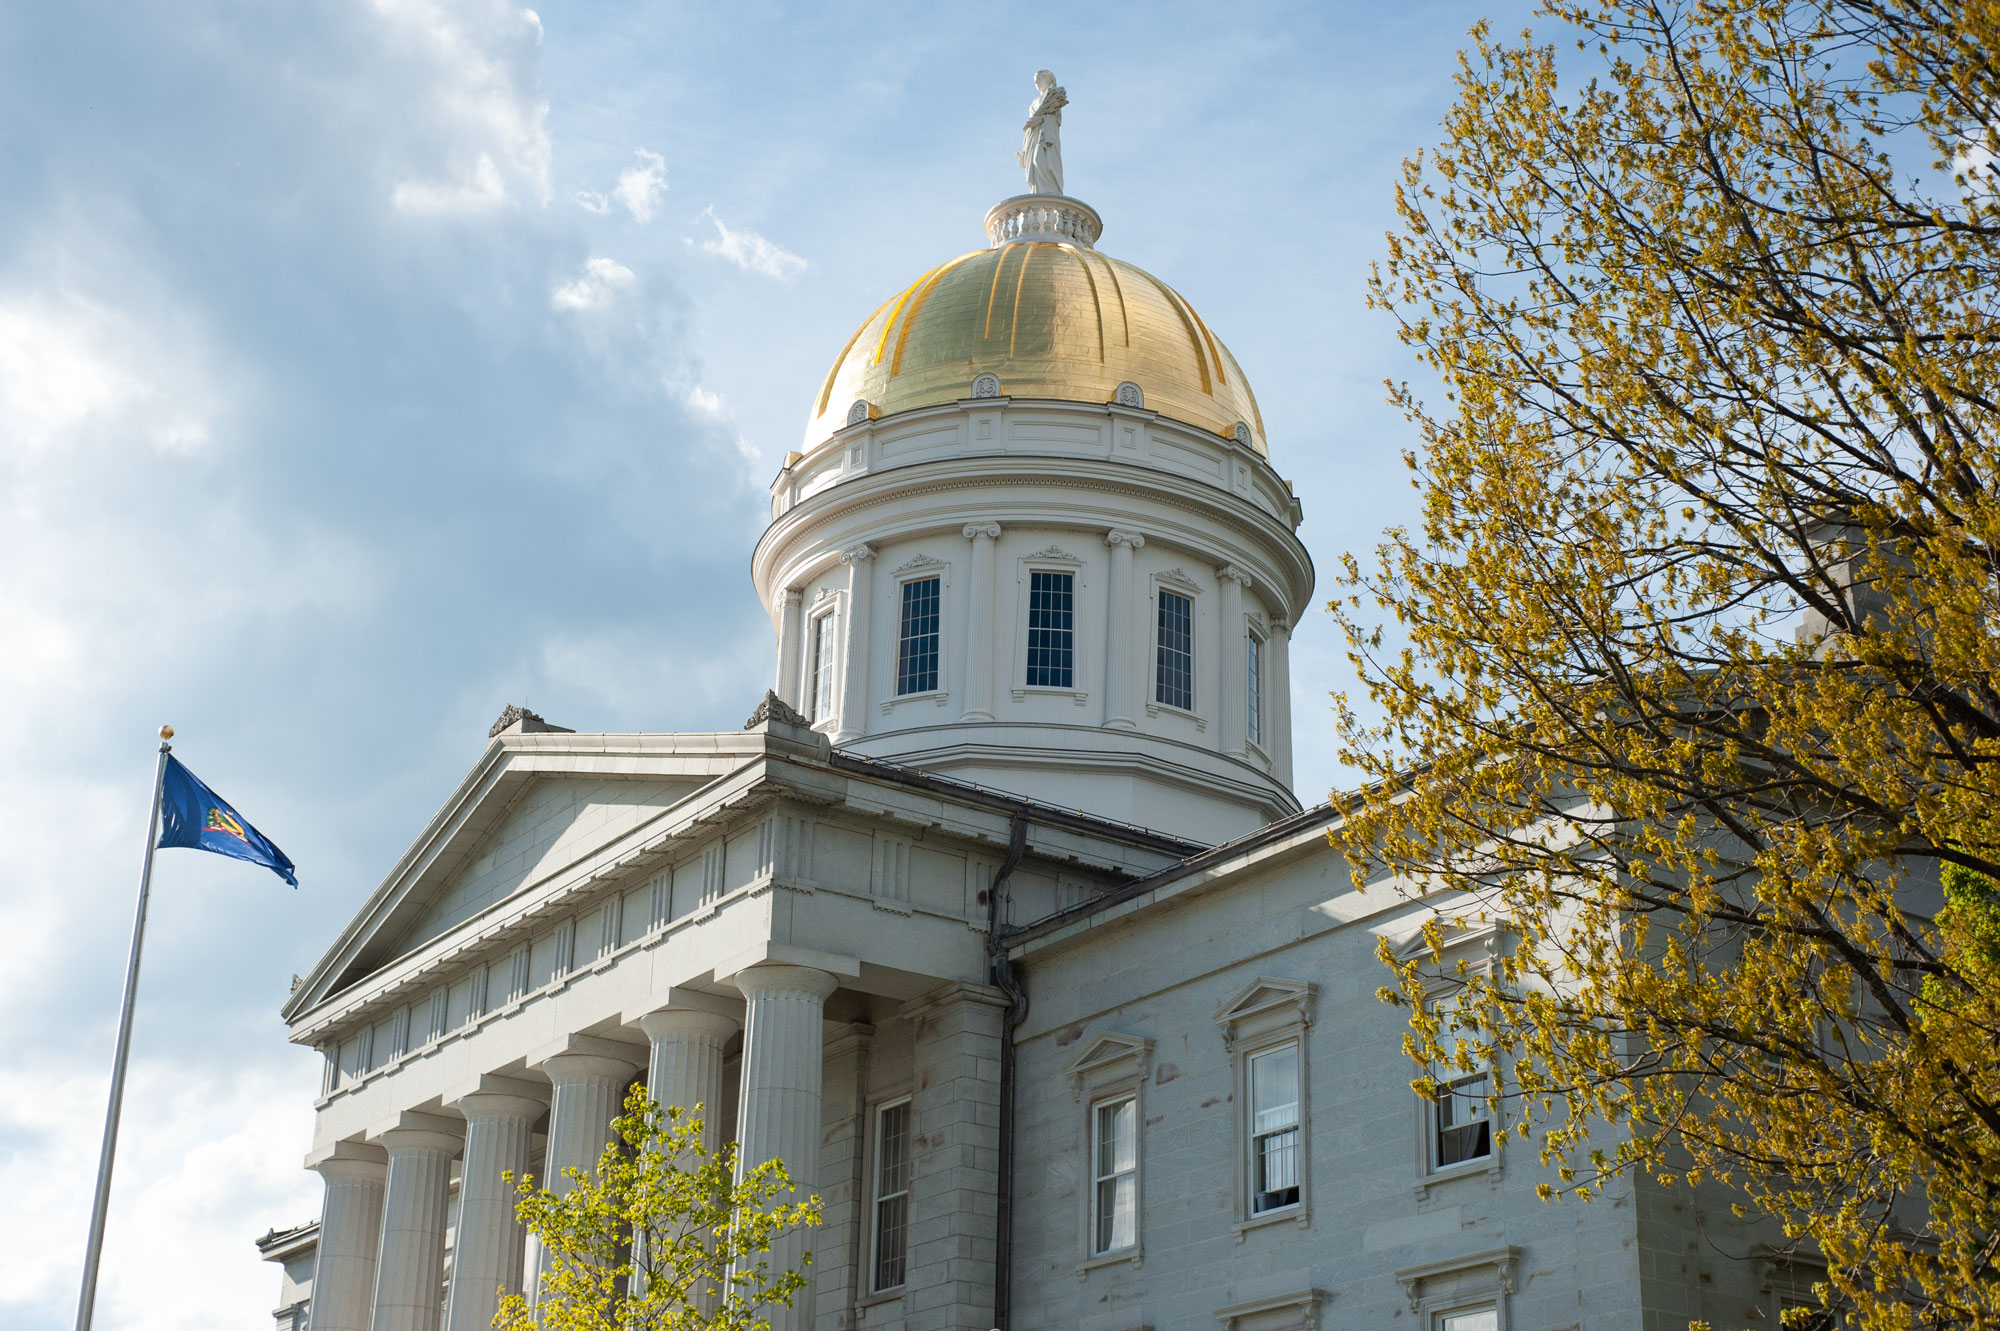 Vermont state capitol building with a gold dome and a statue on top, partially obscured by a blooming tree, under a blue sky with clouds.